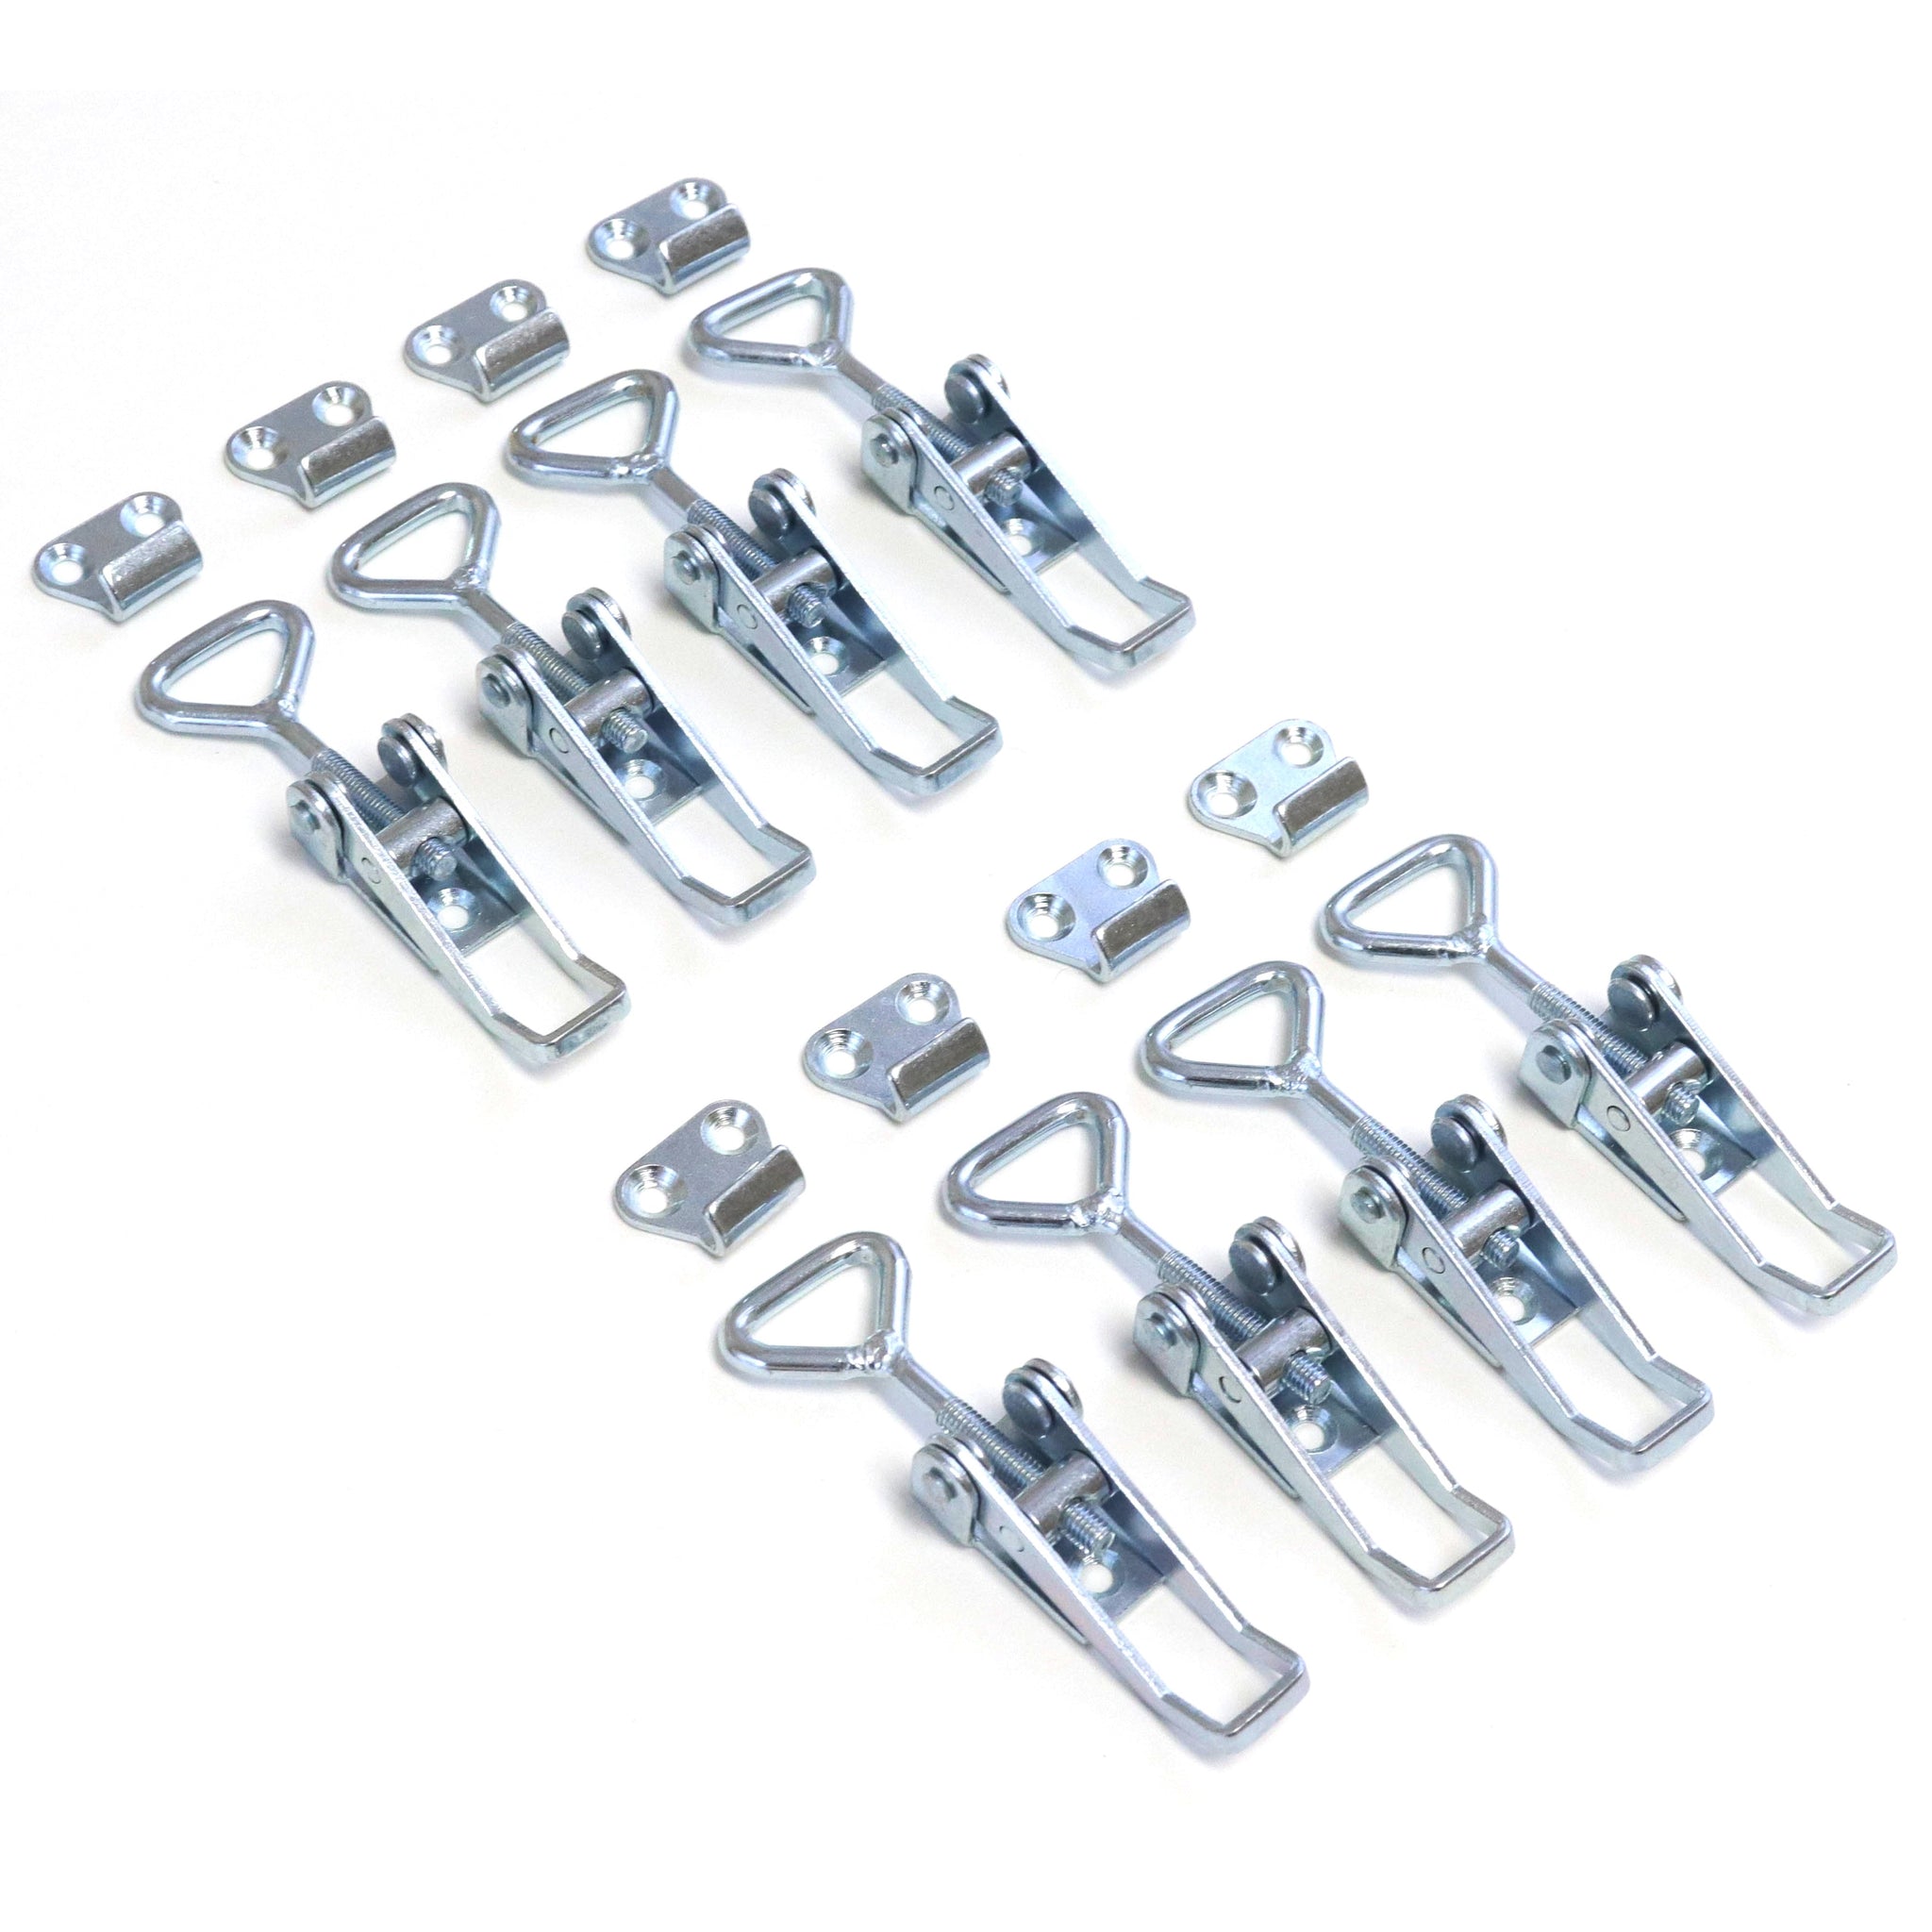 Red Hound Auto 8 Pull Latch Toggle Clamps Adjustable Coated Steel for Cabinets Doors Storage Boxes and More 2-1/8" 54 mm